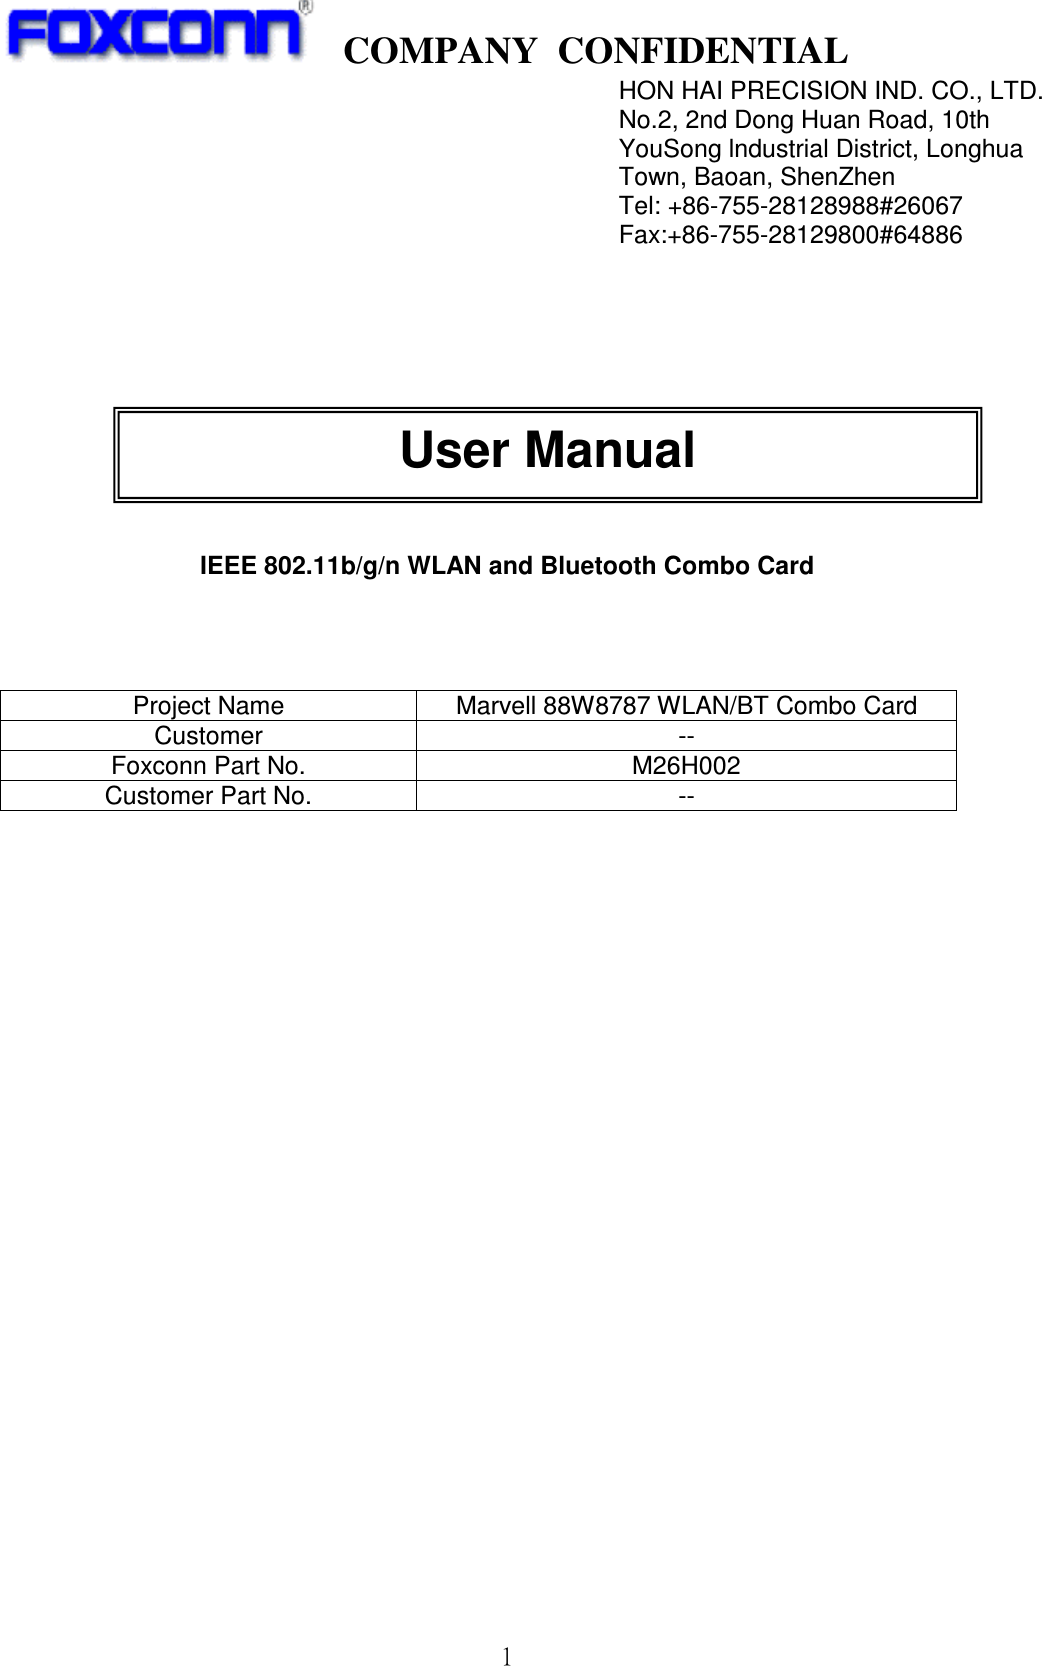    COMPANY  CONFIDENTIAL             1               IEEE 802.11b/g/n WLAN and Bluetooth Combo Card    Project Name  Marvell 88W8787 WLAN/BT Combo Card Customer  -- Foxconn Part No.  M26H002 Customer Part No.  --                             HON HAI PRECISION IND. CO., LTD. No.2, 2nd Dong Huan Road, 10th YouSong lndustrial District, Longhua Town, Baoan, ShenZhen Tel: +86-755-28128988#26067     Fax:+86-755-28129800#64886 User Manual  